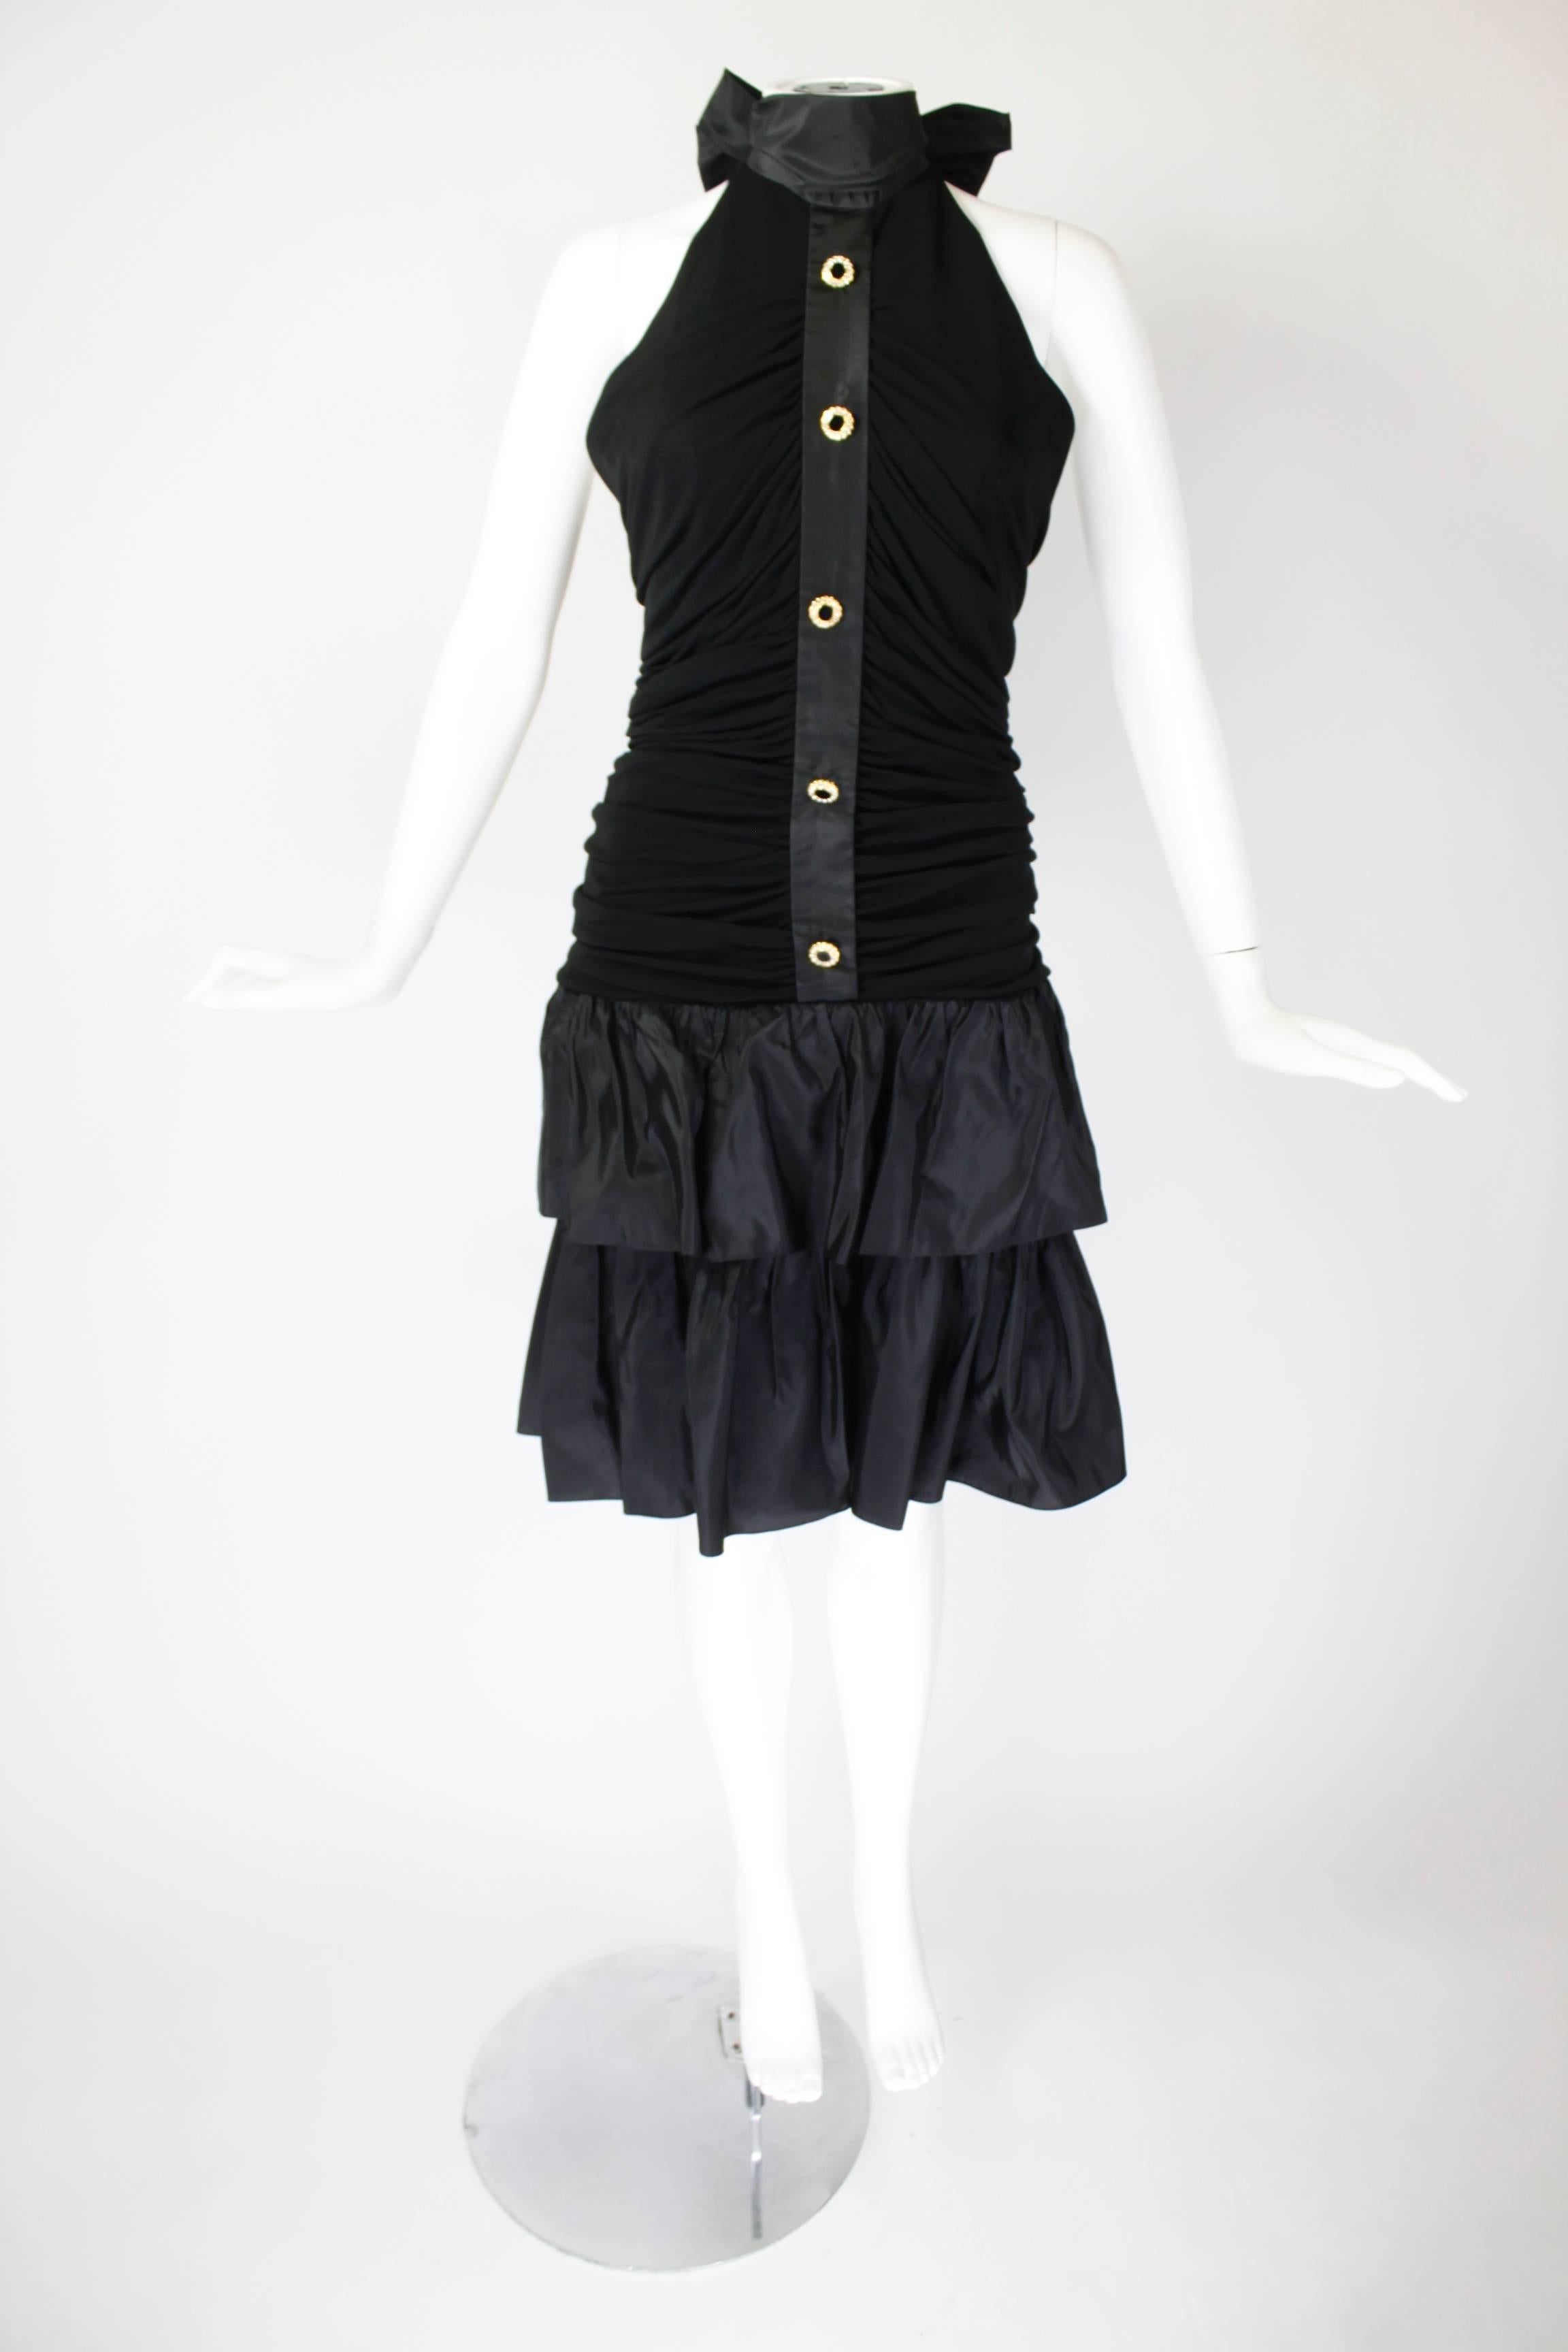 1980s Givenchy Black Ruched Cocktail Dress with Rhinestone Buttons 1